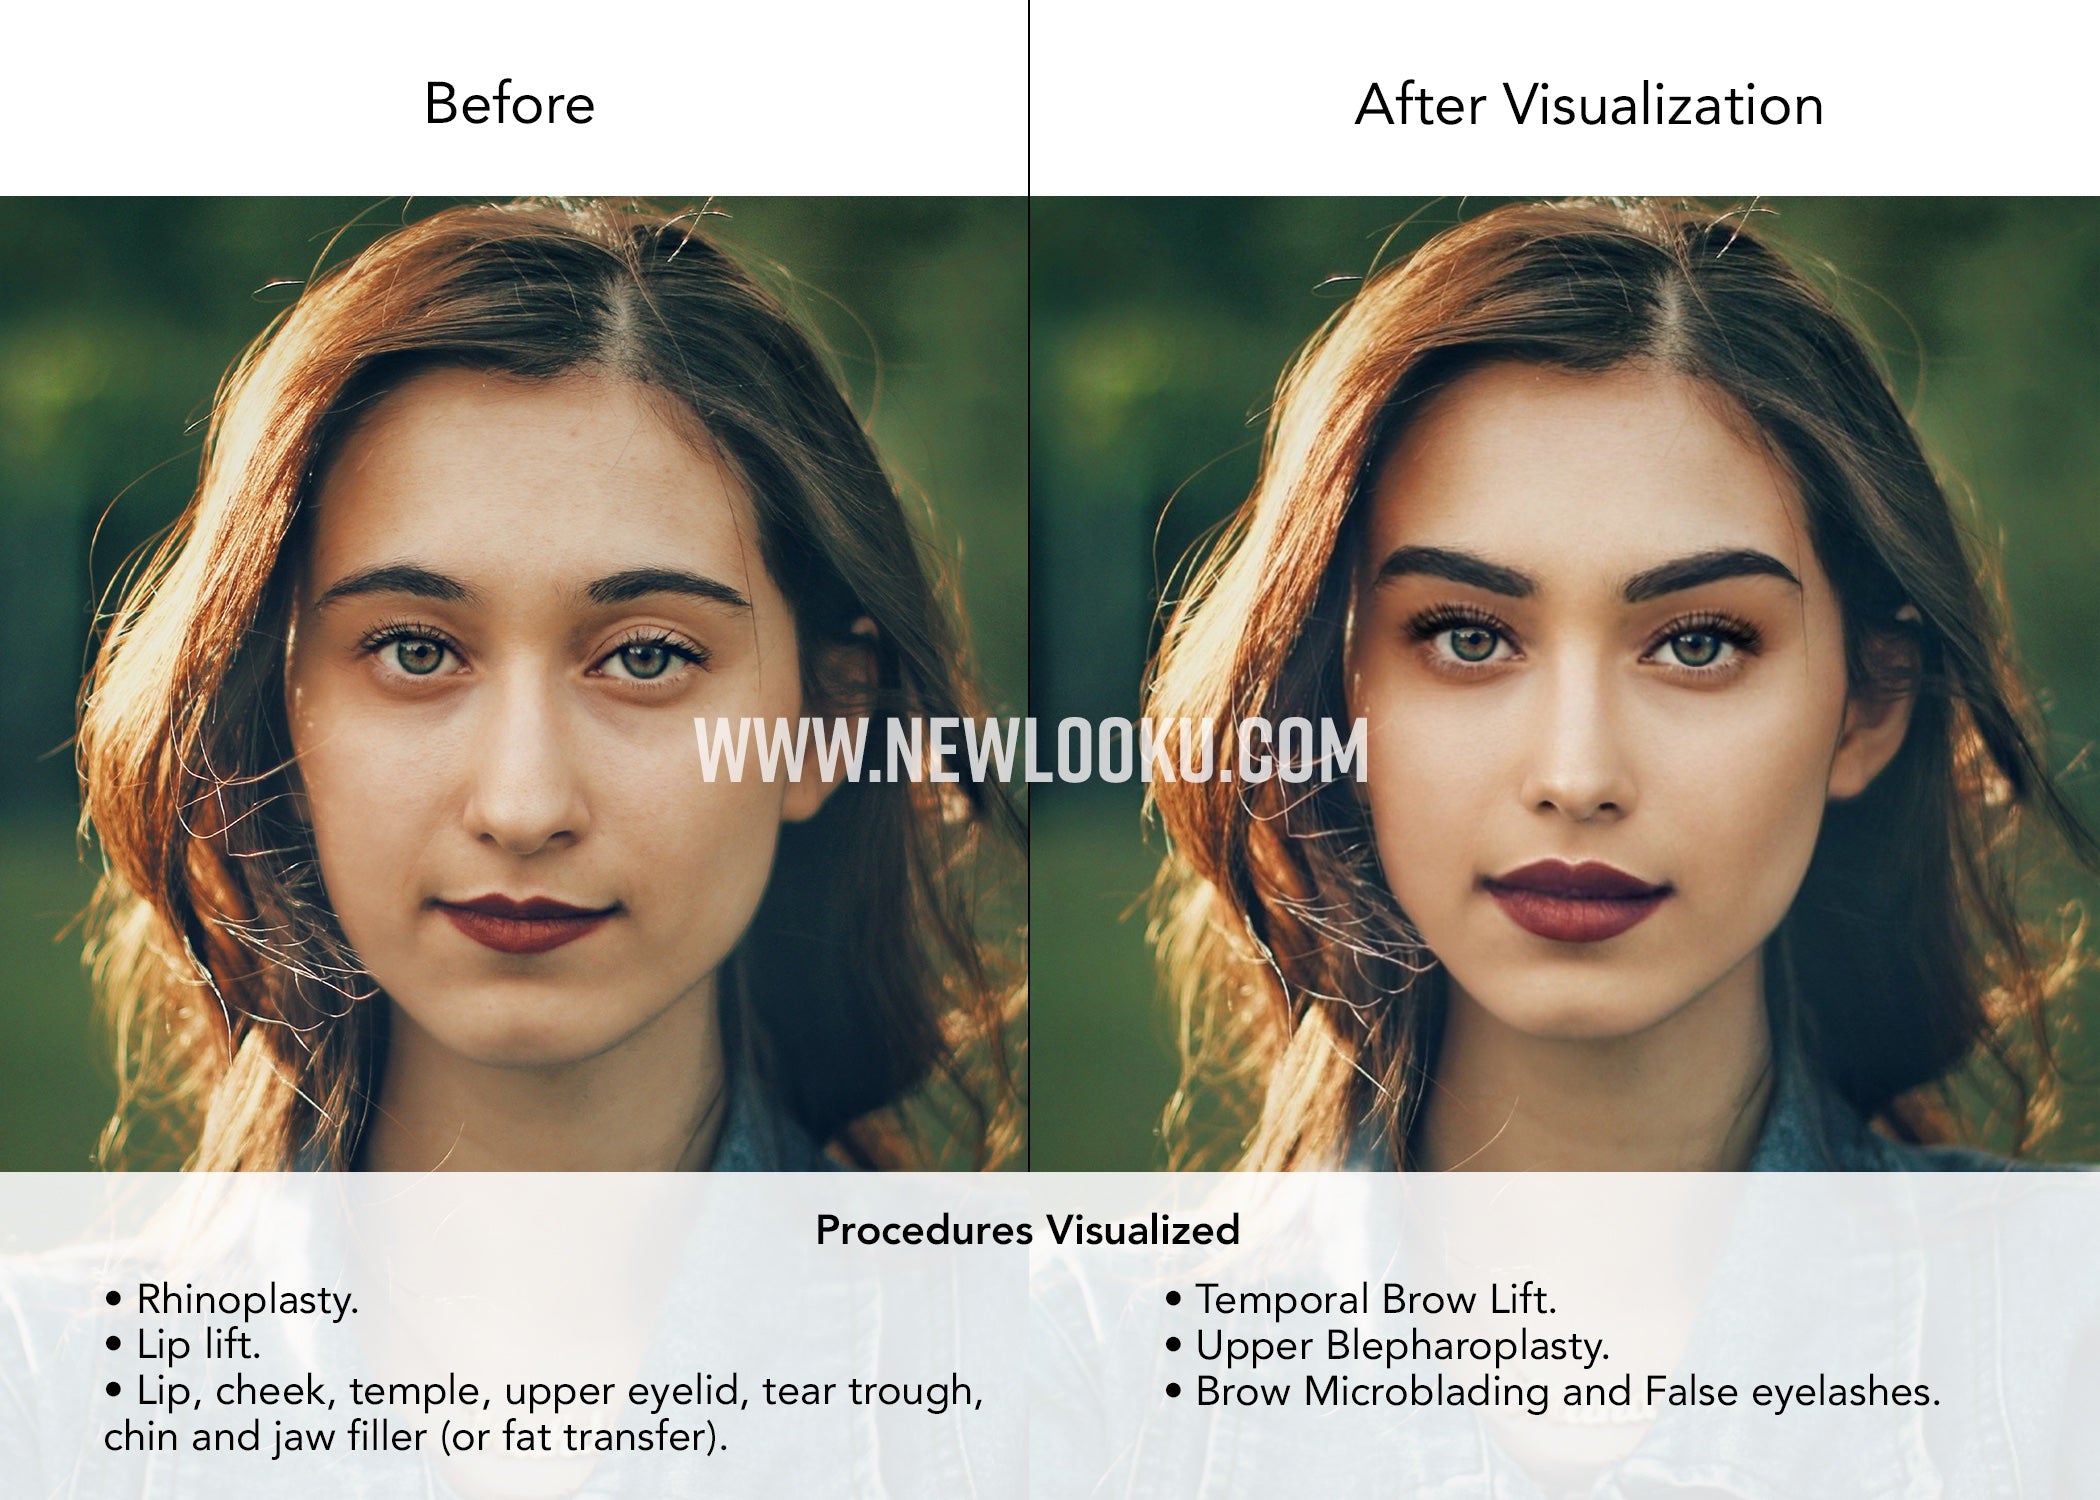 Female Plastic Surgery Visualization Before and After: Rhinoplasty. Lip lift. Lip, cheek, temple, upper eyelid, tear trough, chin and jaw filler (or fat transfer). Temporal Brow Lift. Upper Blepharoplasty. Brow Microblading and False eyelashes. 